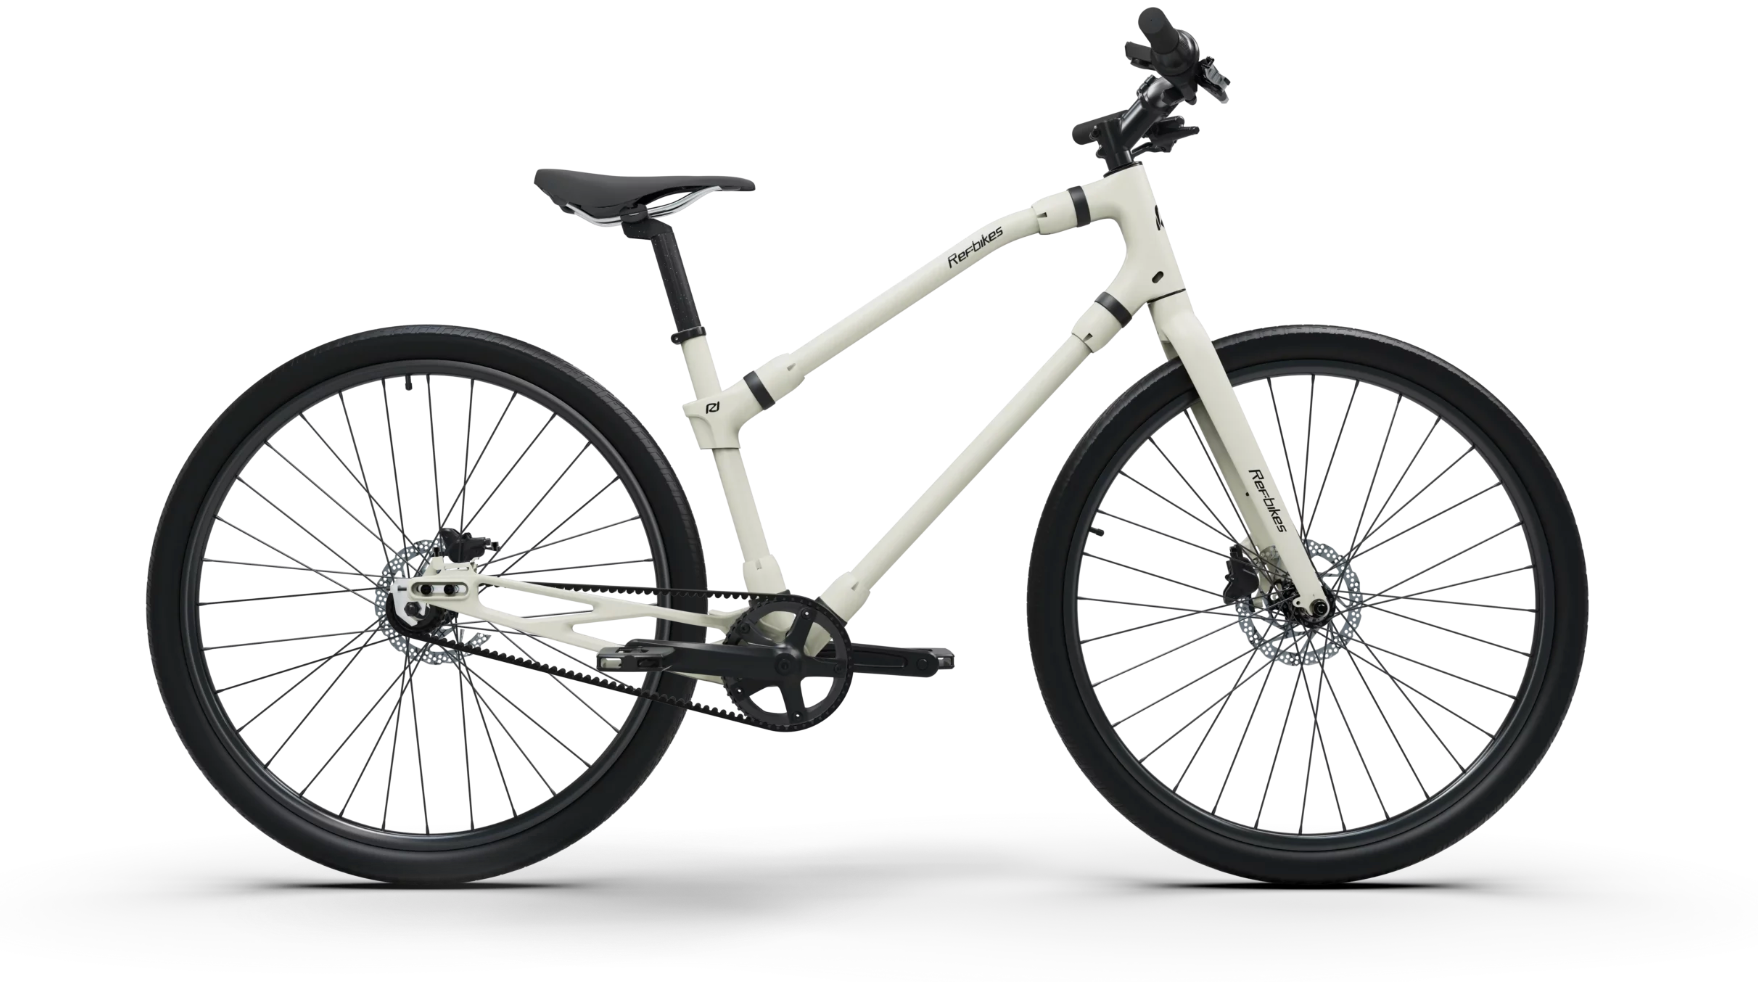 Elegant off-white Ref Essential bicycle, showcasing its minimalist frame and efficient assist system.